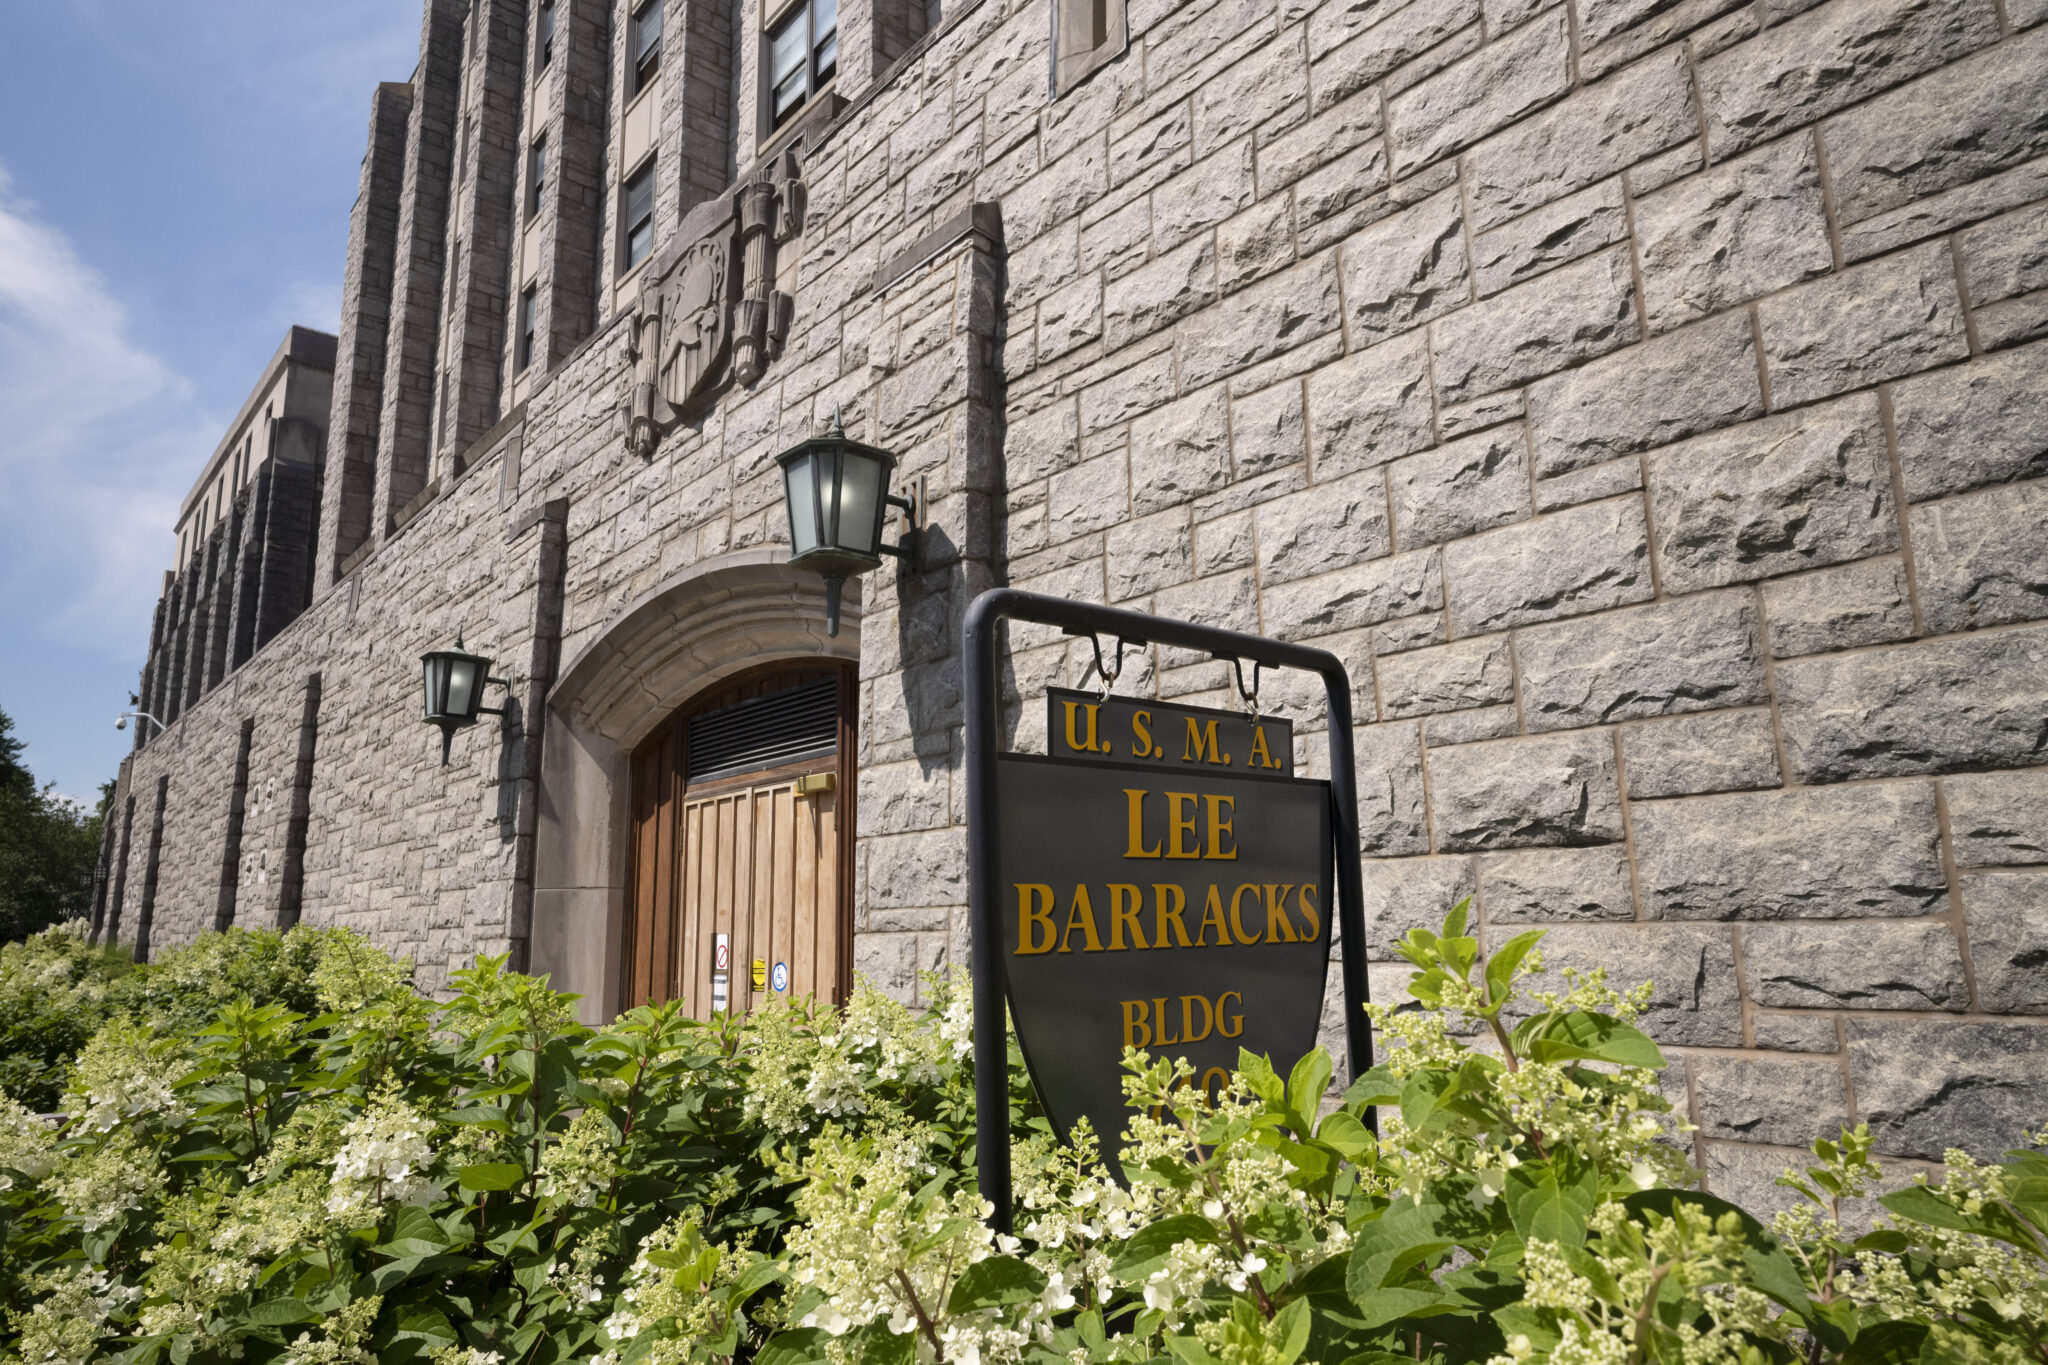 FILE - Lee Barracks is shown at the U.S. Military Academy, on Monday, July 13, 2020, in West Point, N.Y. The building is named for Civil War General Robert E. Lee, a West Point graduate who led the Confederate Army. The tributes to Lee that still dot the West Point campus illustrate the academy's dichotomy: The cadets who study military history are taught that Confederate soldiers were no heroes, yet the references to Lee remain. (AP Photo/Mark Lennihan, File)